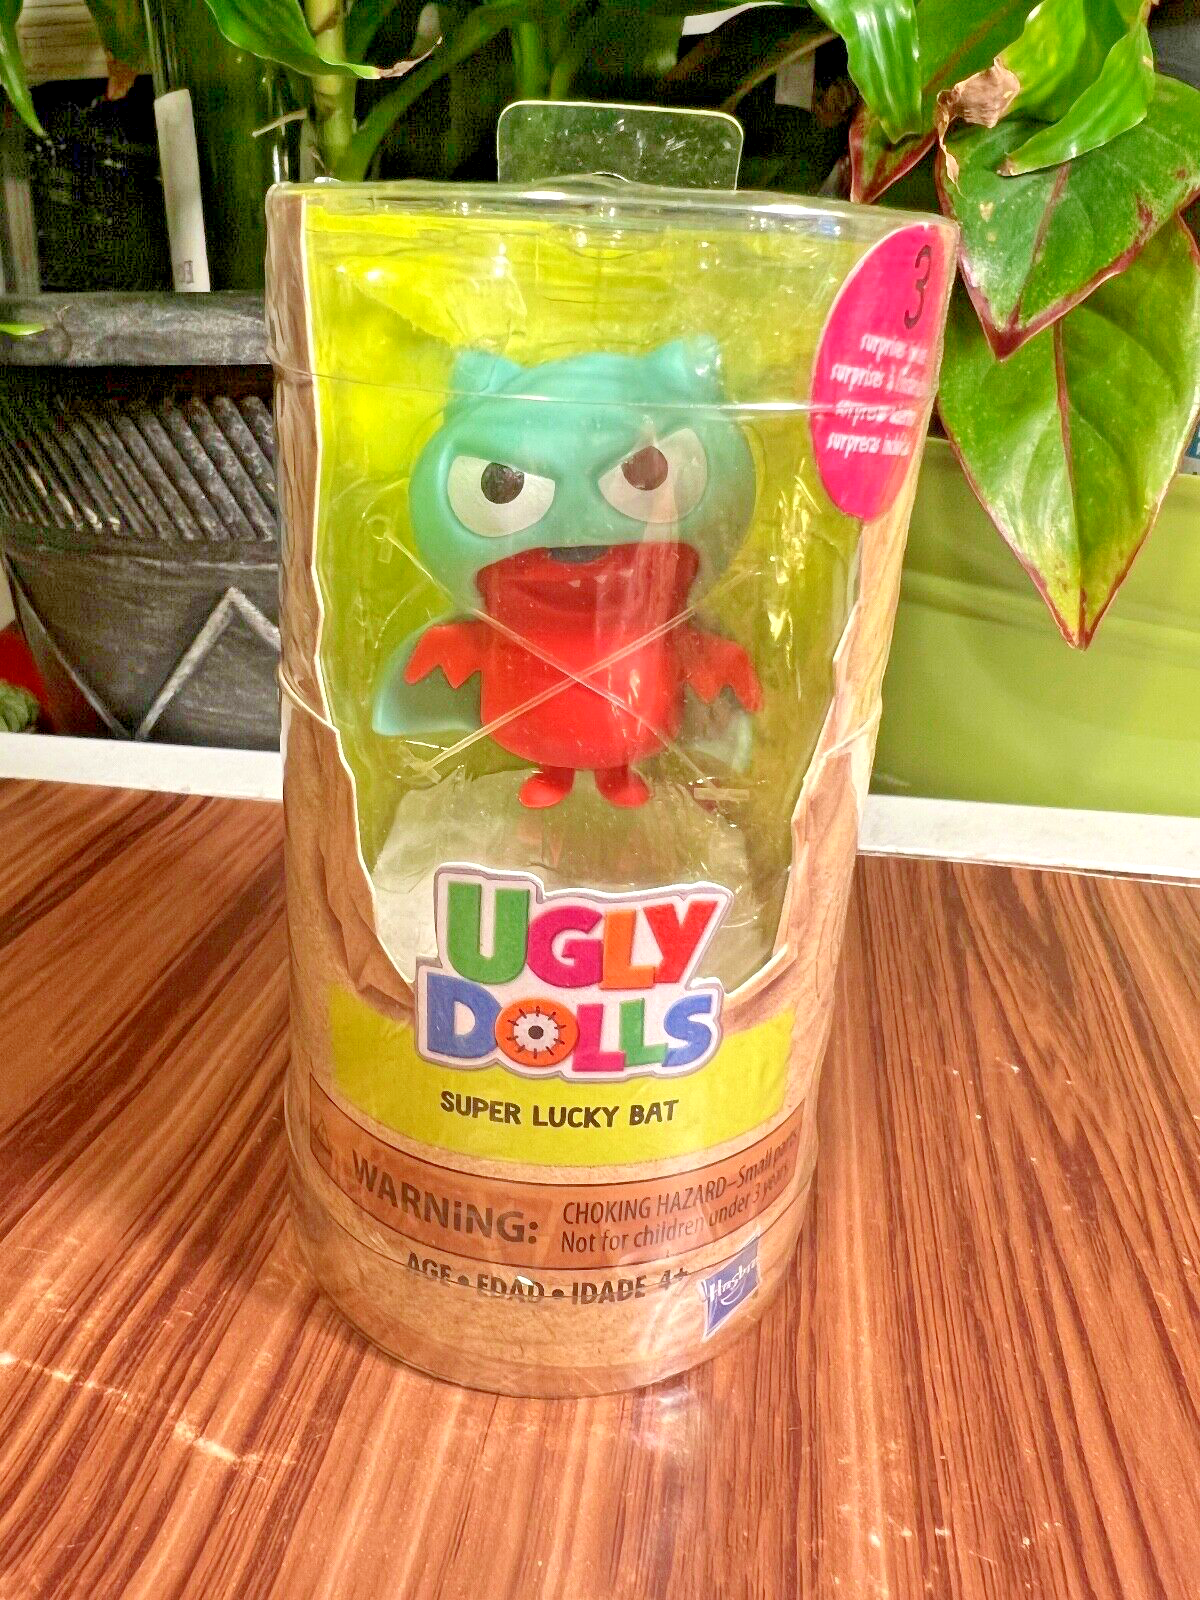 Ugly Dolls Super Lucky Bat Figure 3 Surprises Inside Toy 2019 Movie Hasbro NEW Hasbro Does not apply